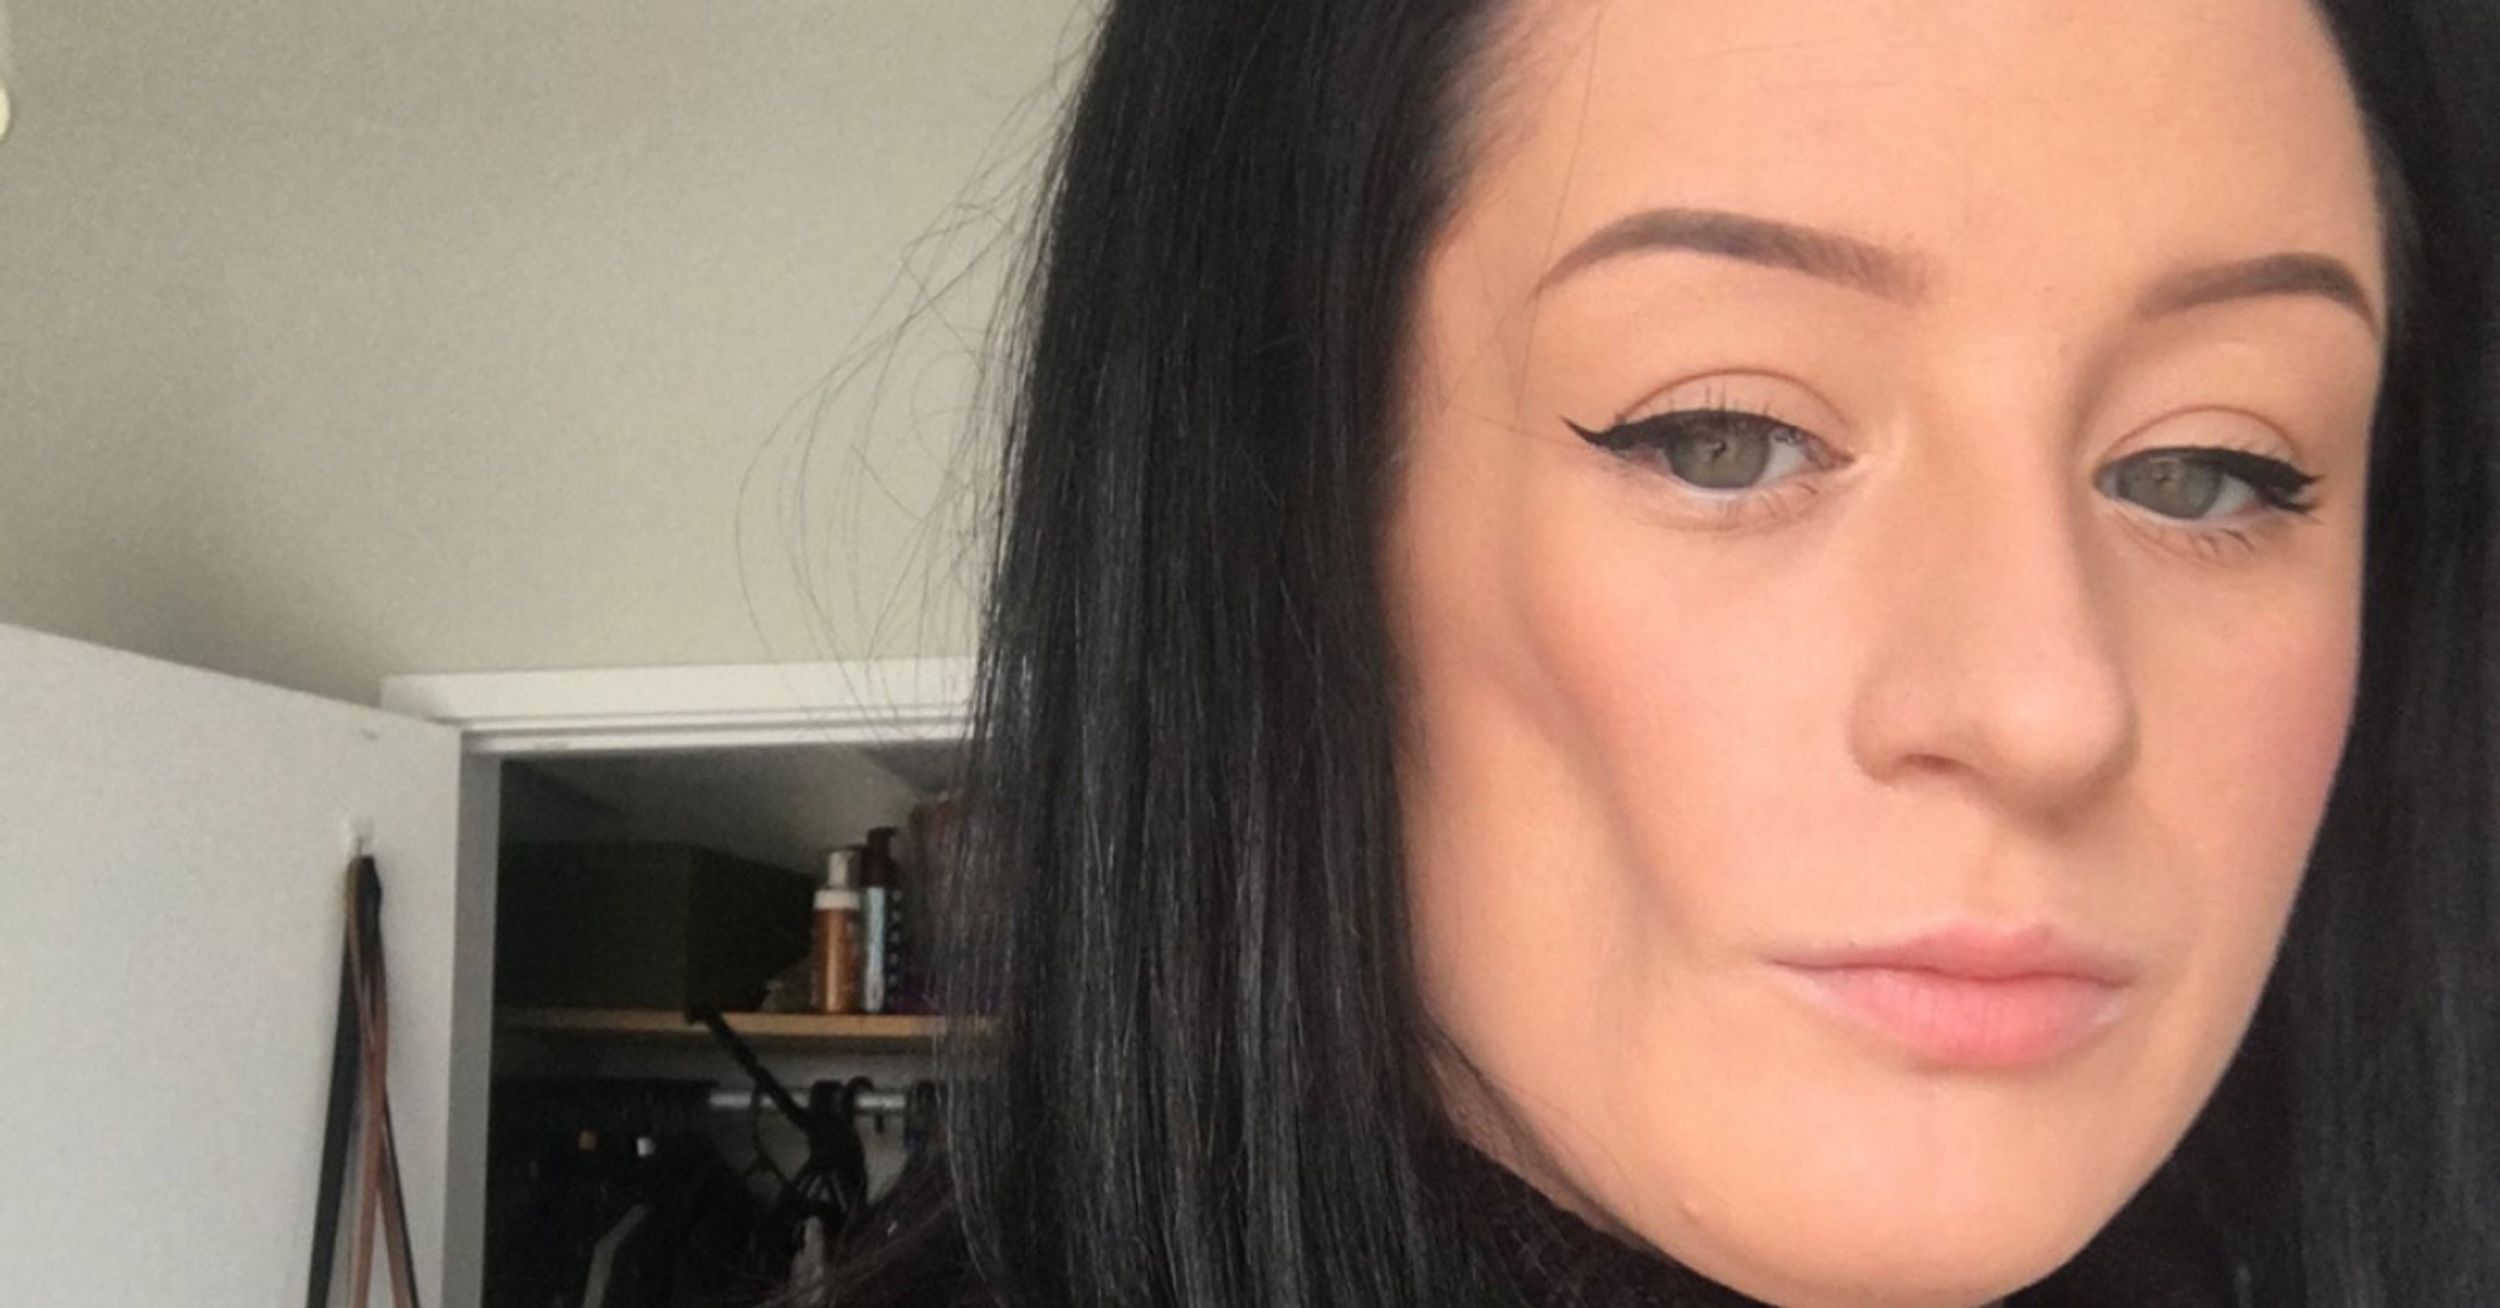 Woman With Rare Condition That Made Her Face Sink In Has Cheek Rebuilt With Fat From Her Stomach